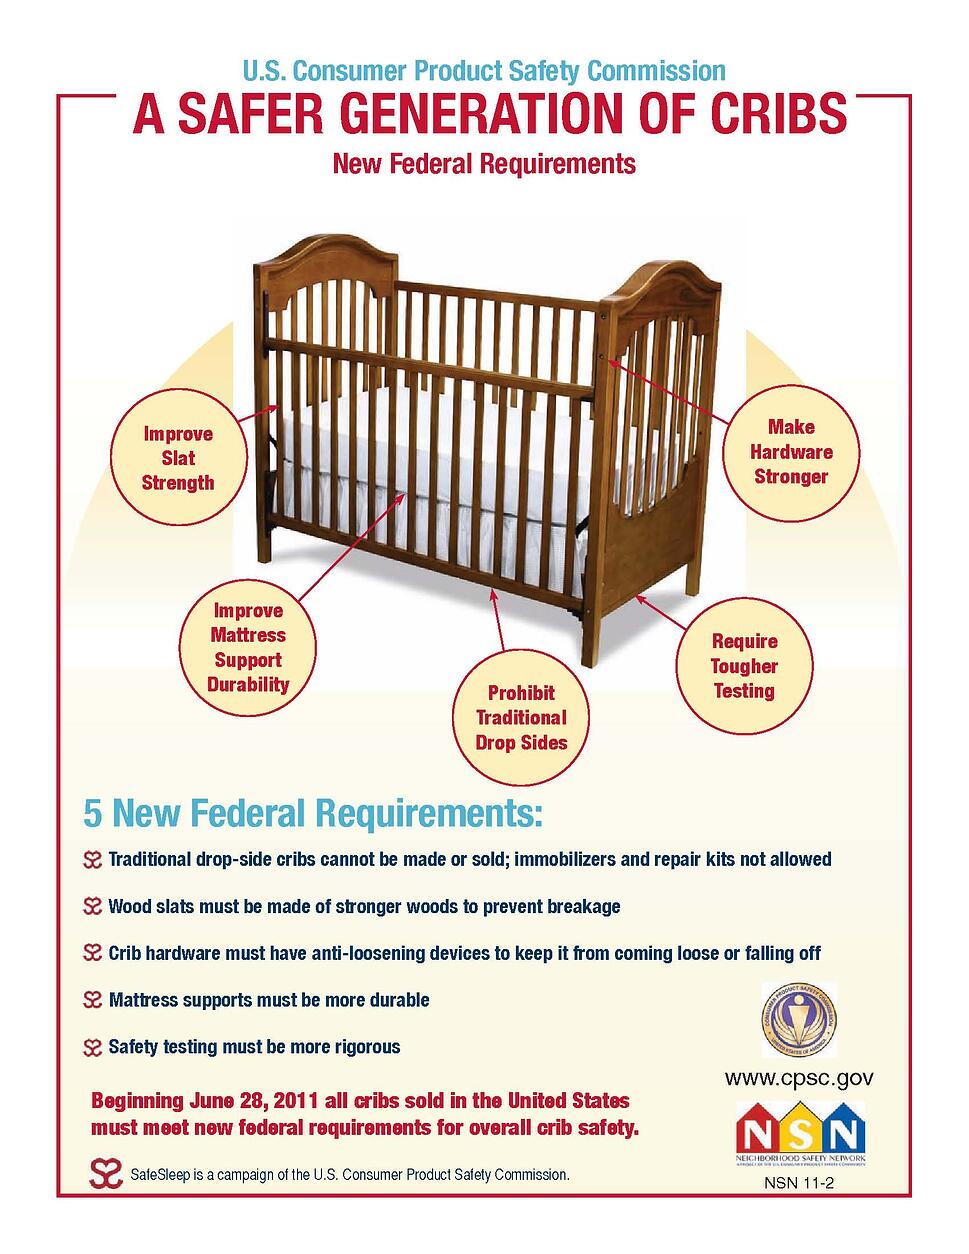 Guidelines for Painting a Crib Safely